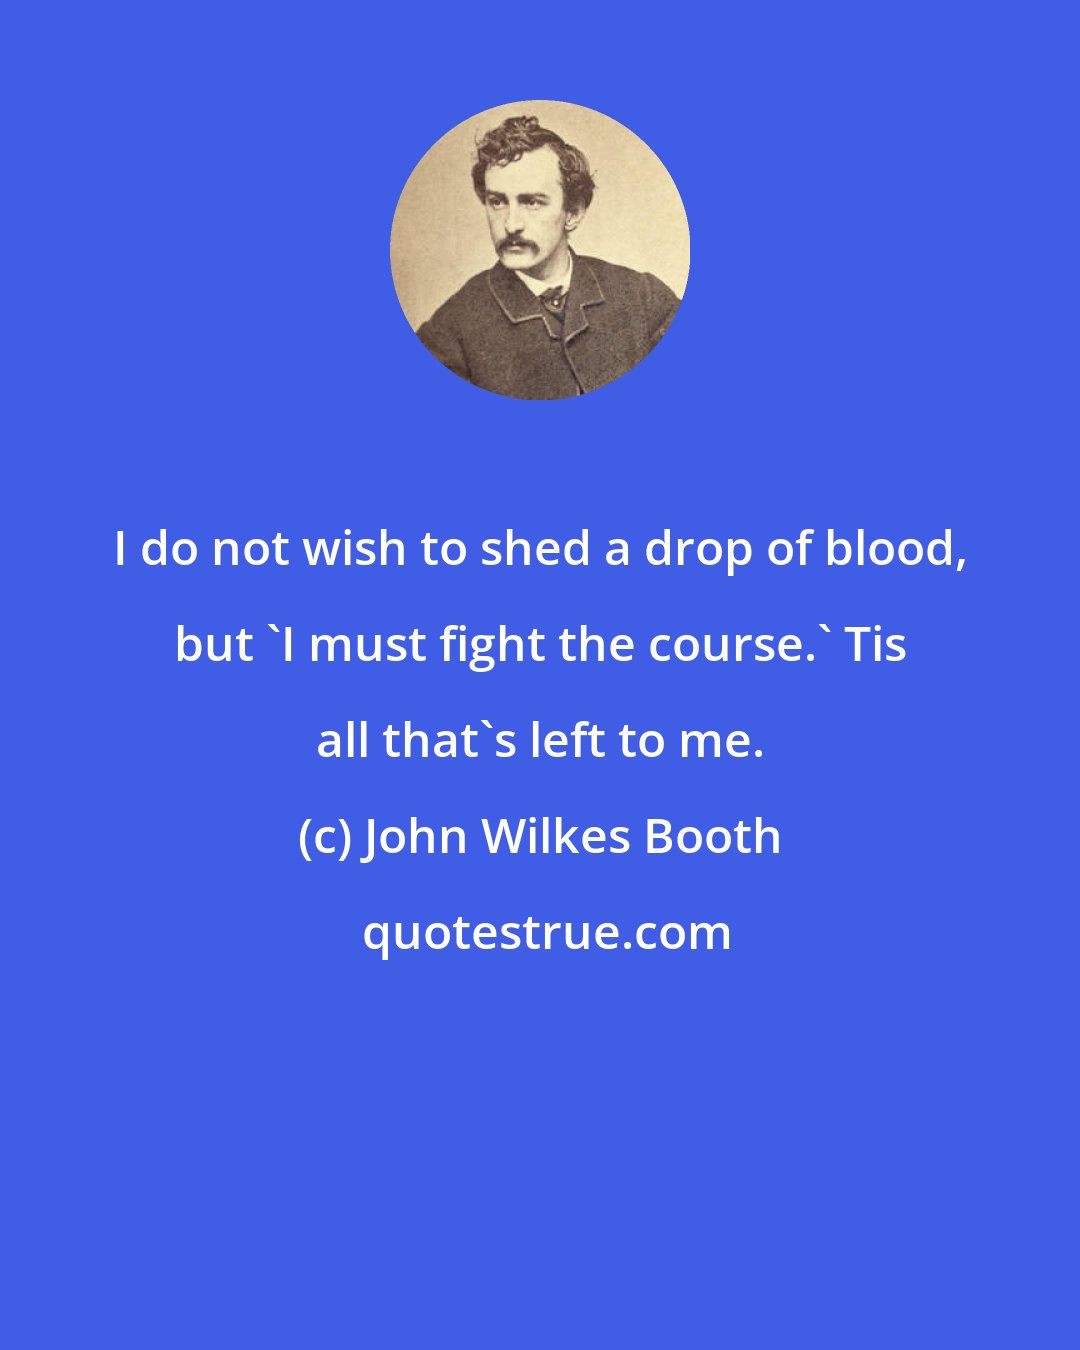 John Wilkes Booth: I do not wish to shed a drop of blood, but 'I must fight the course.' Tis all that's left to me.